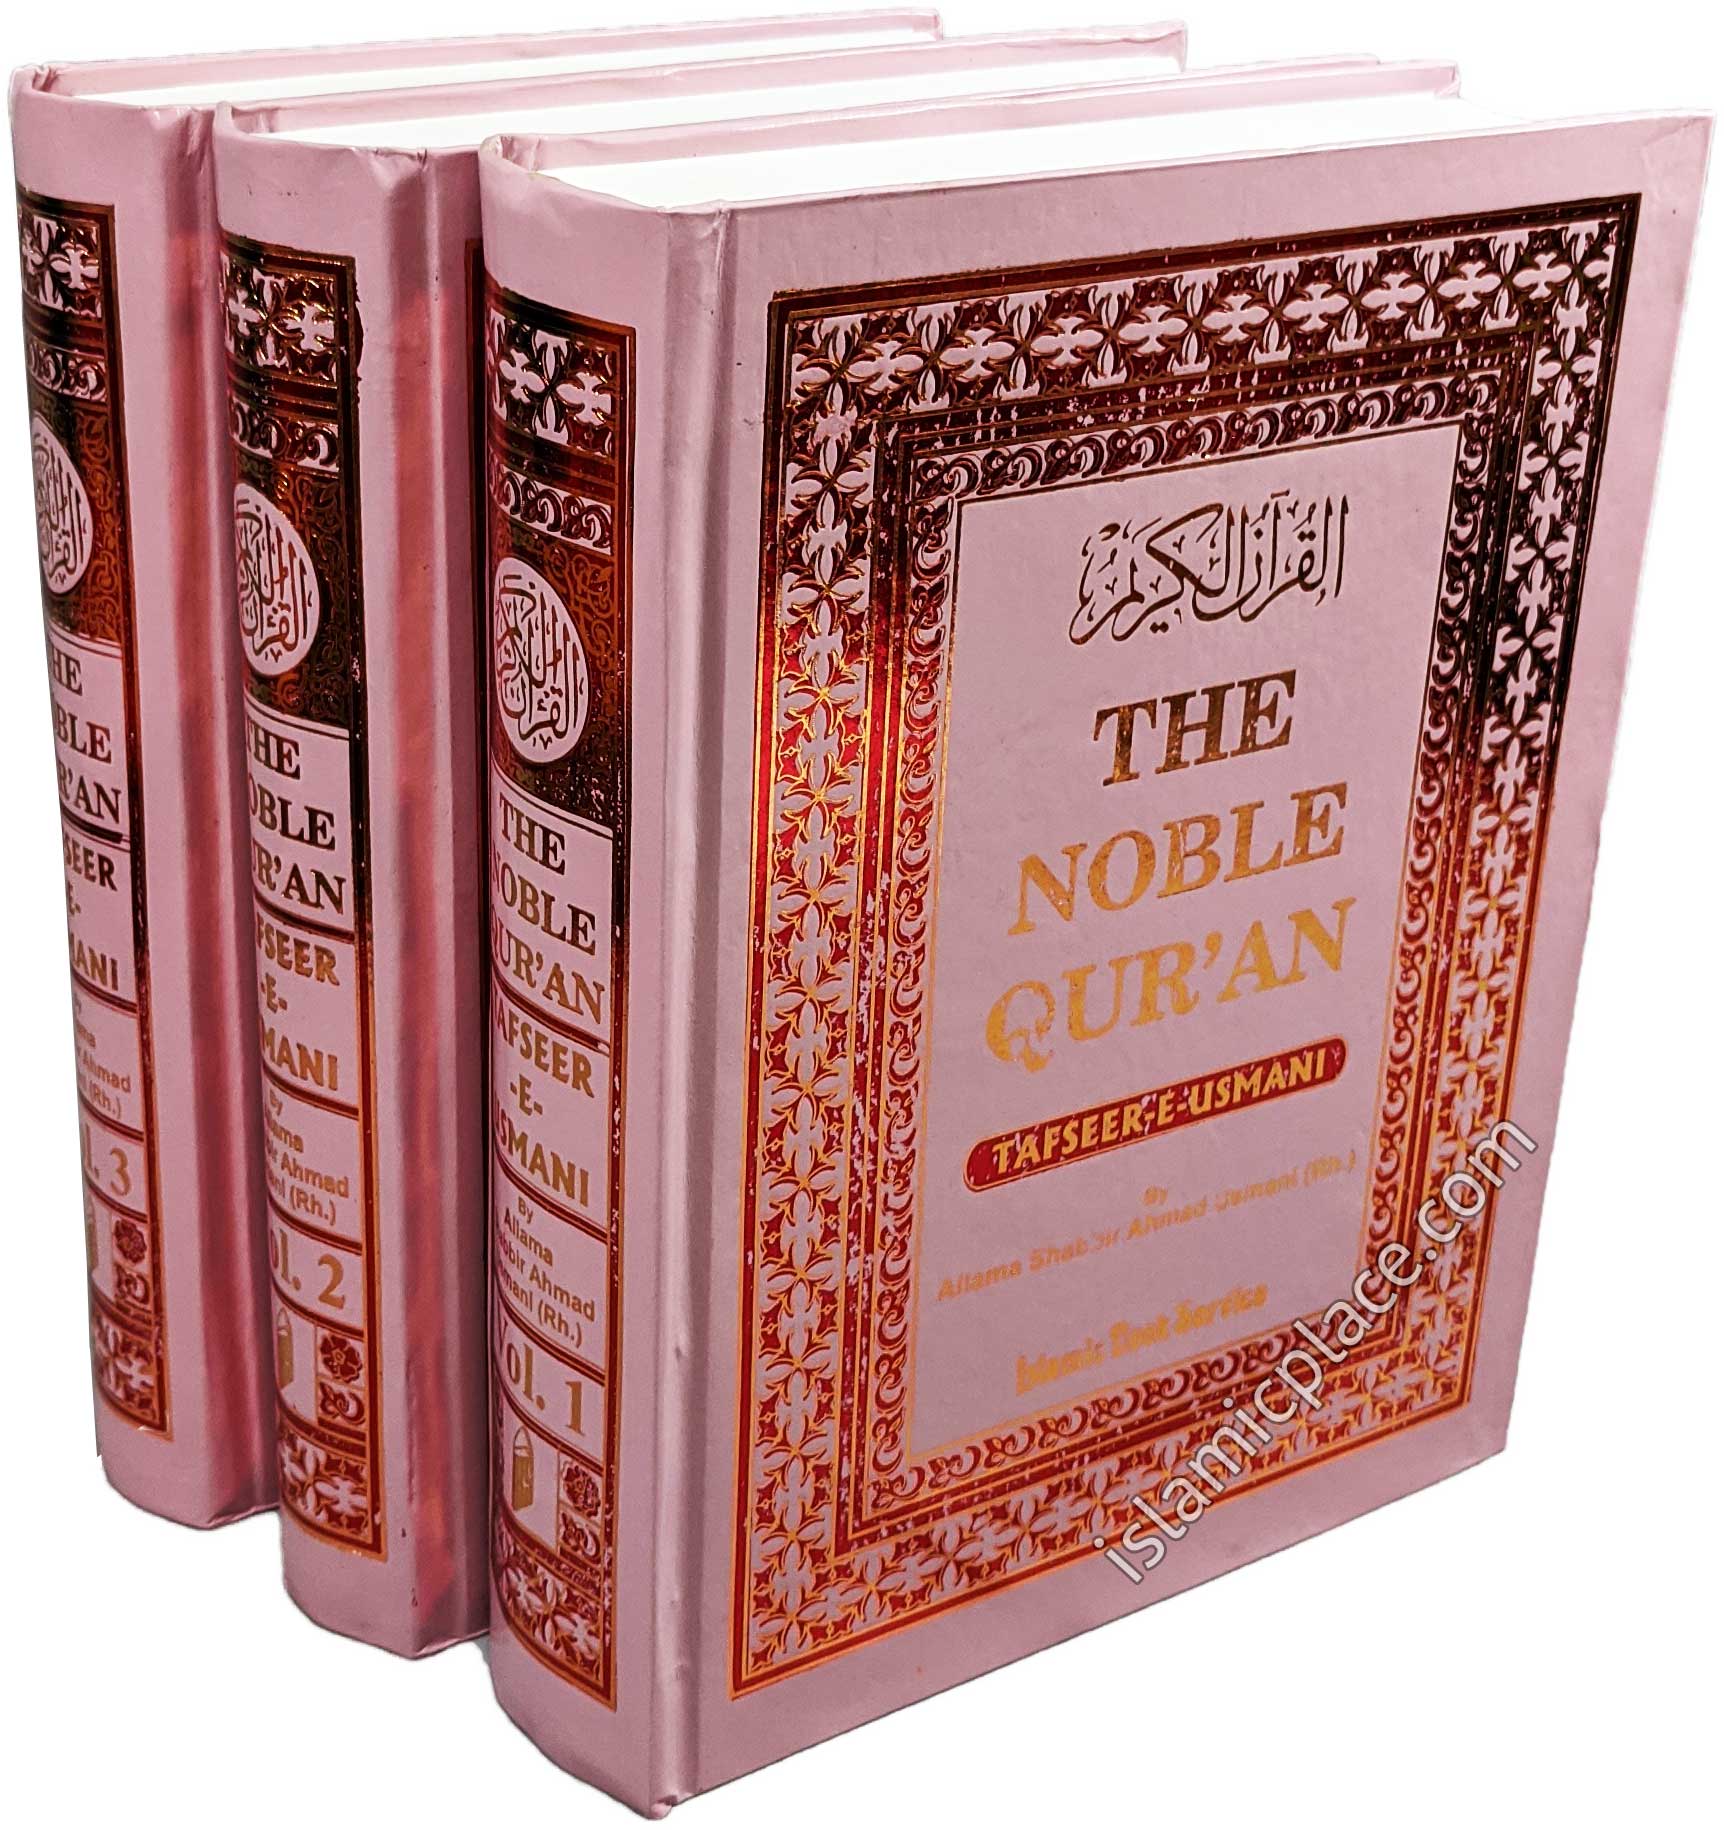 [3 vol set] The Noble Qur'an - Tafseer-e-Usmani (Pink cover)